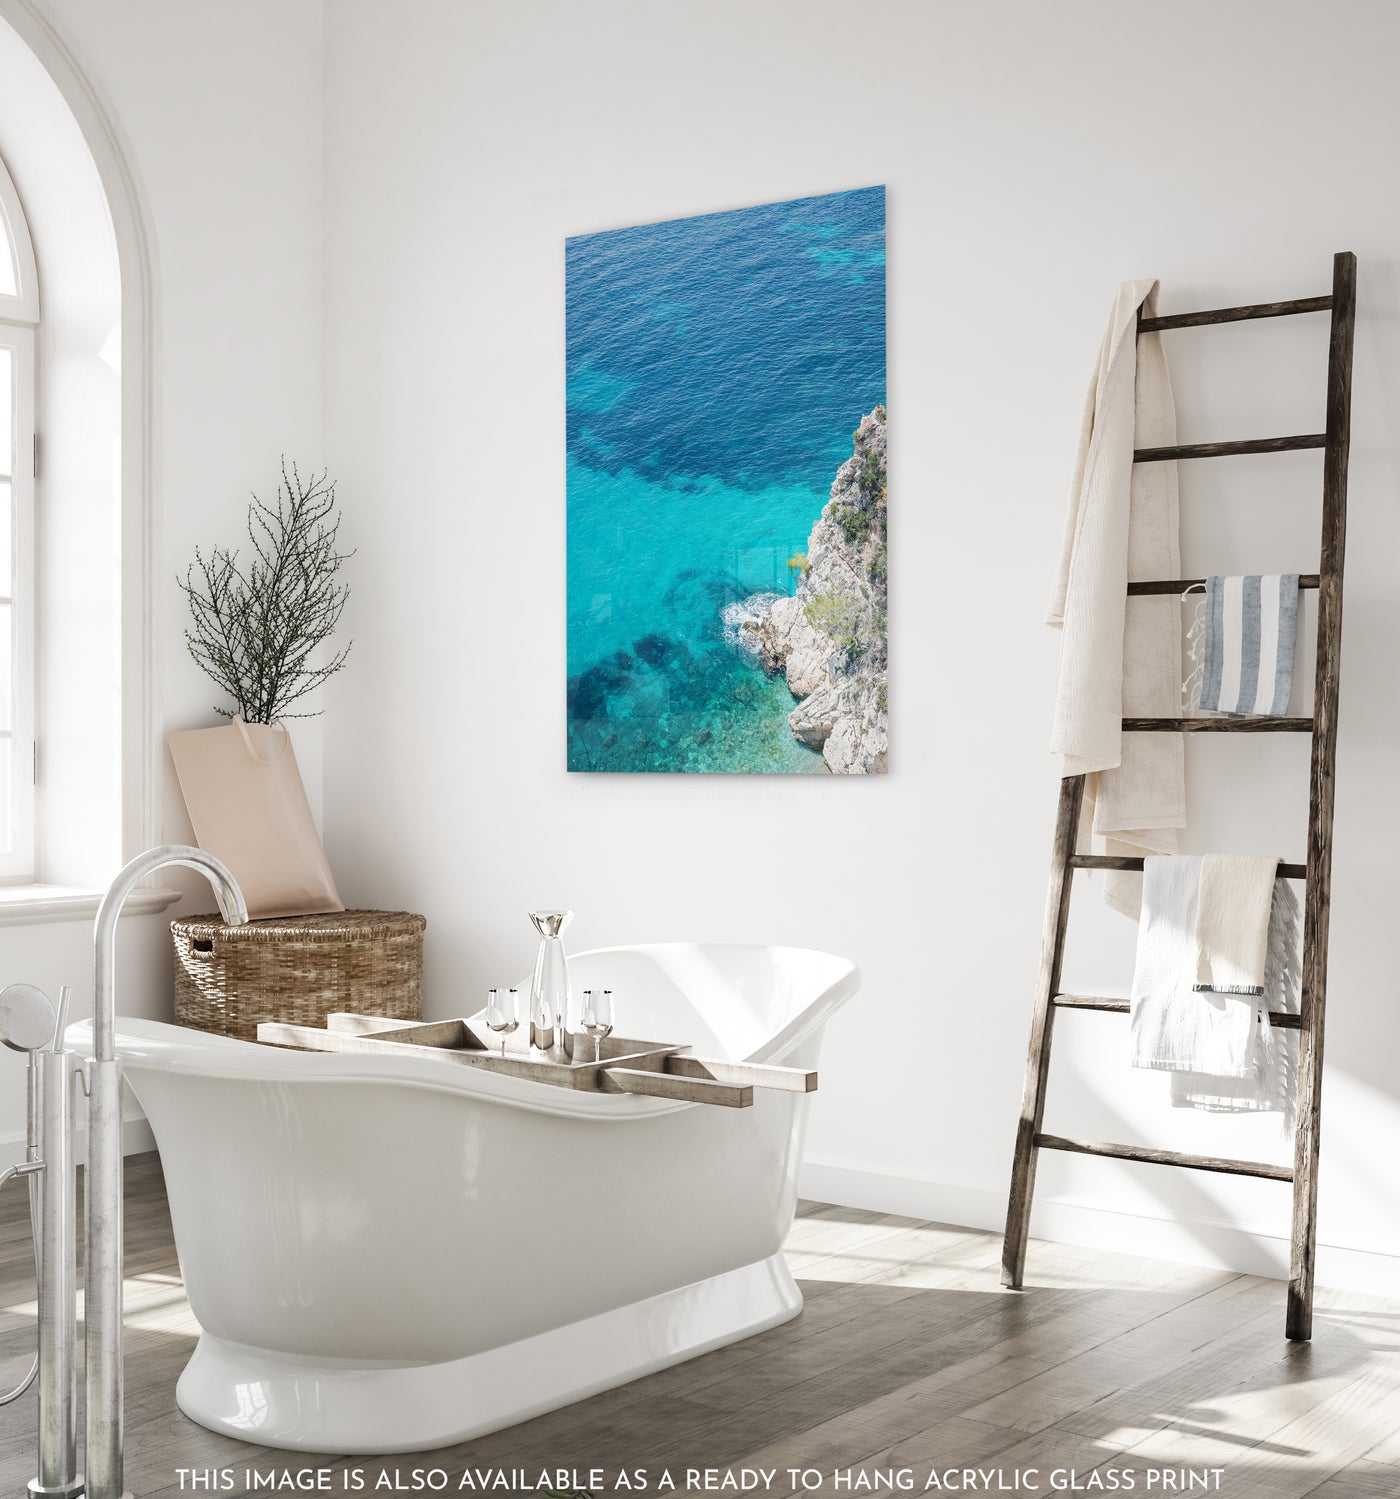 The Mediterranean No 4 - Acrylic glass art print by Cattie Coyle Photography in bathroom